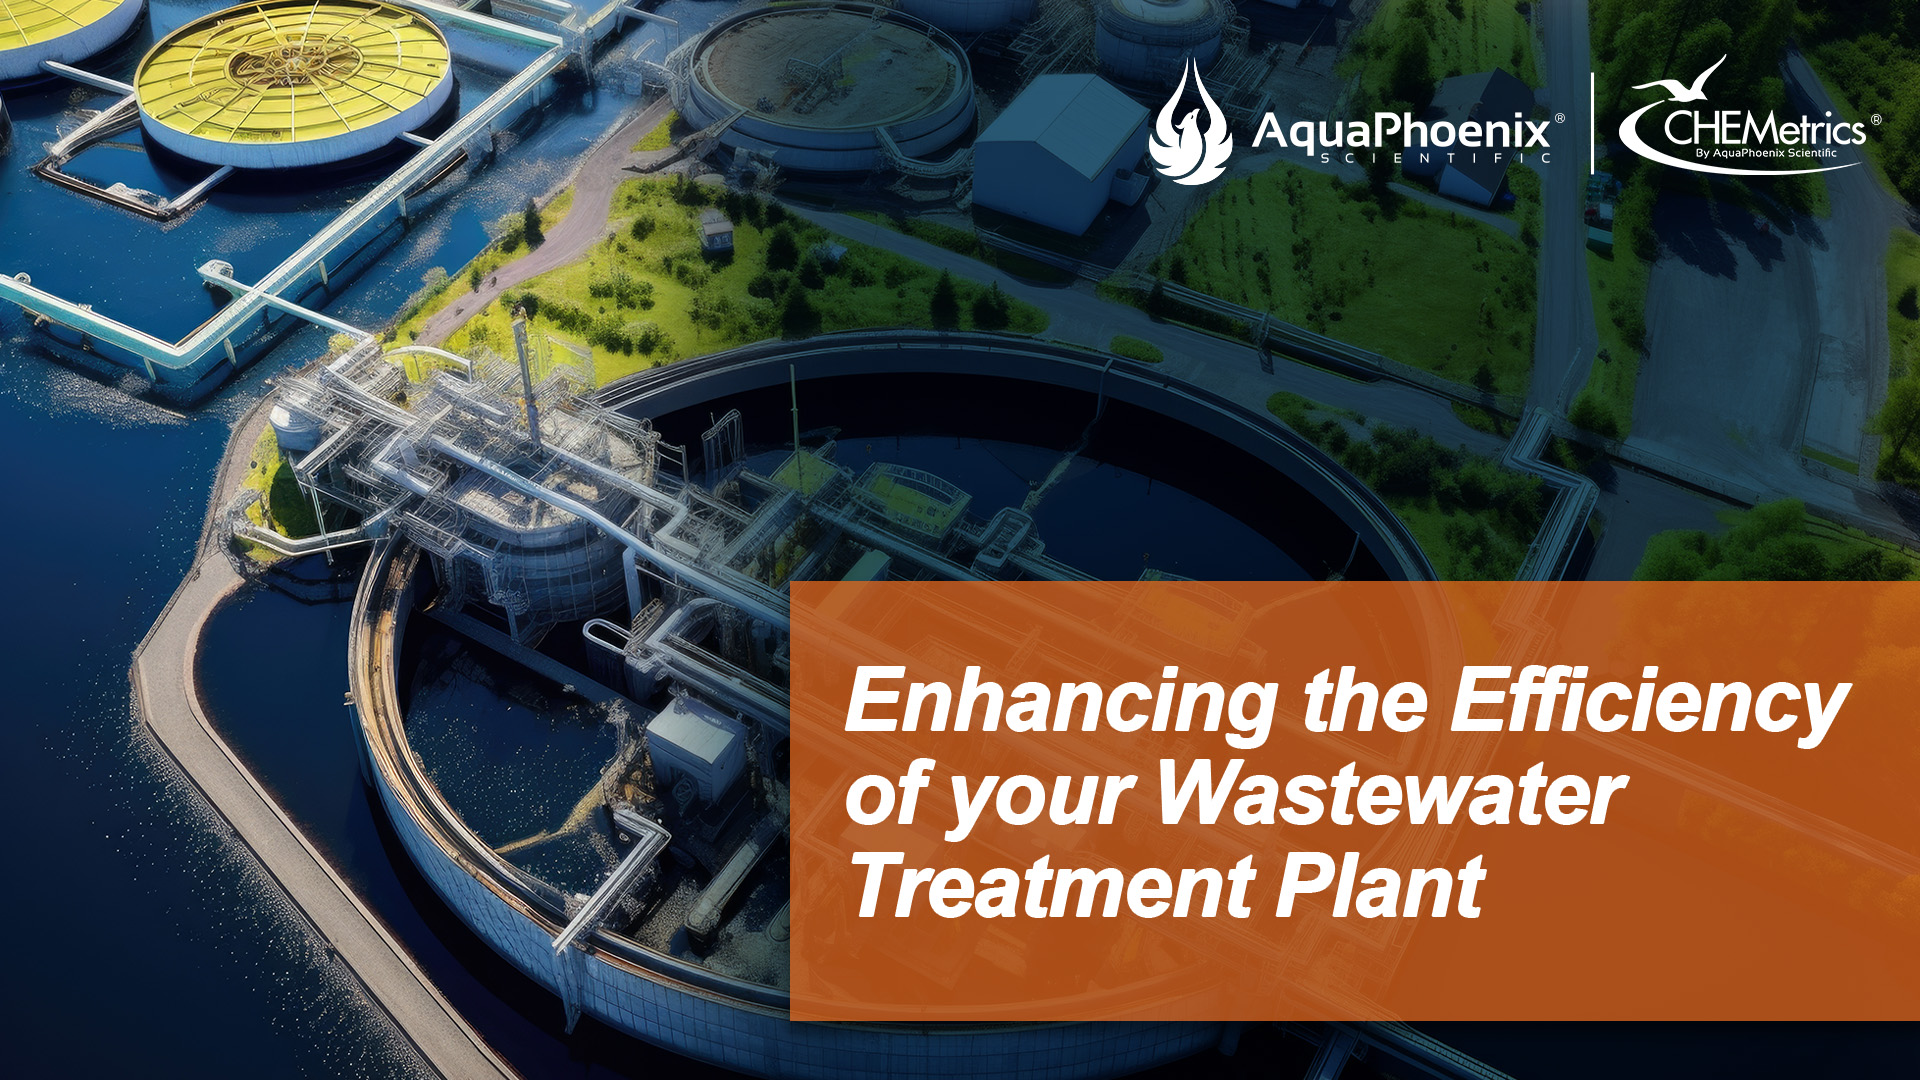 Enhancing the Efficiency of Your Wastewater Treatment Plant